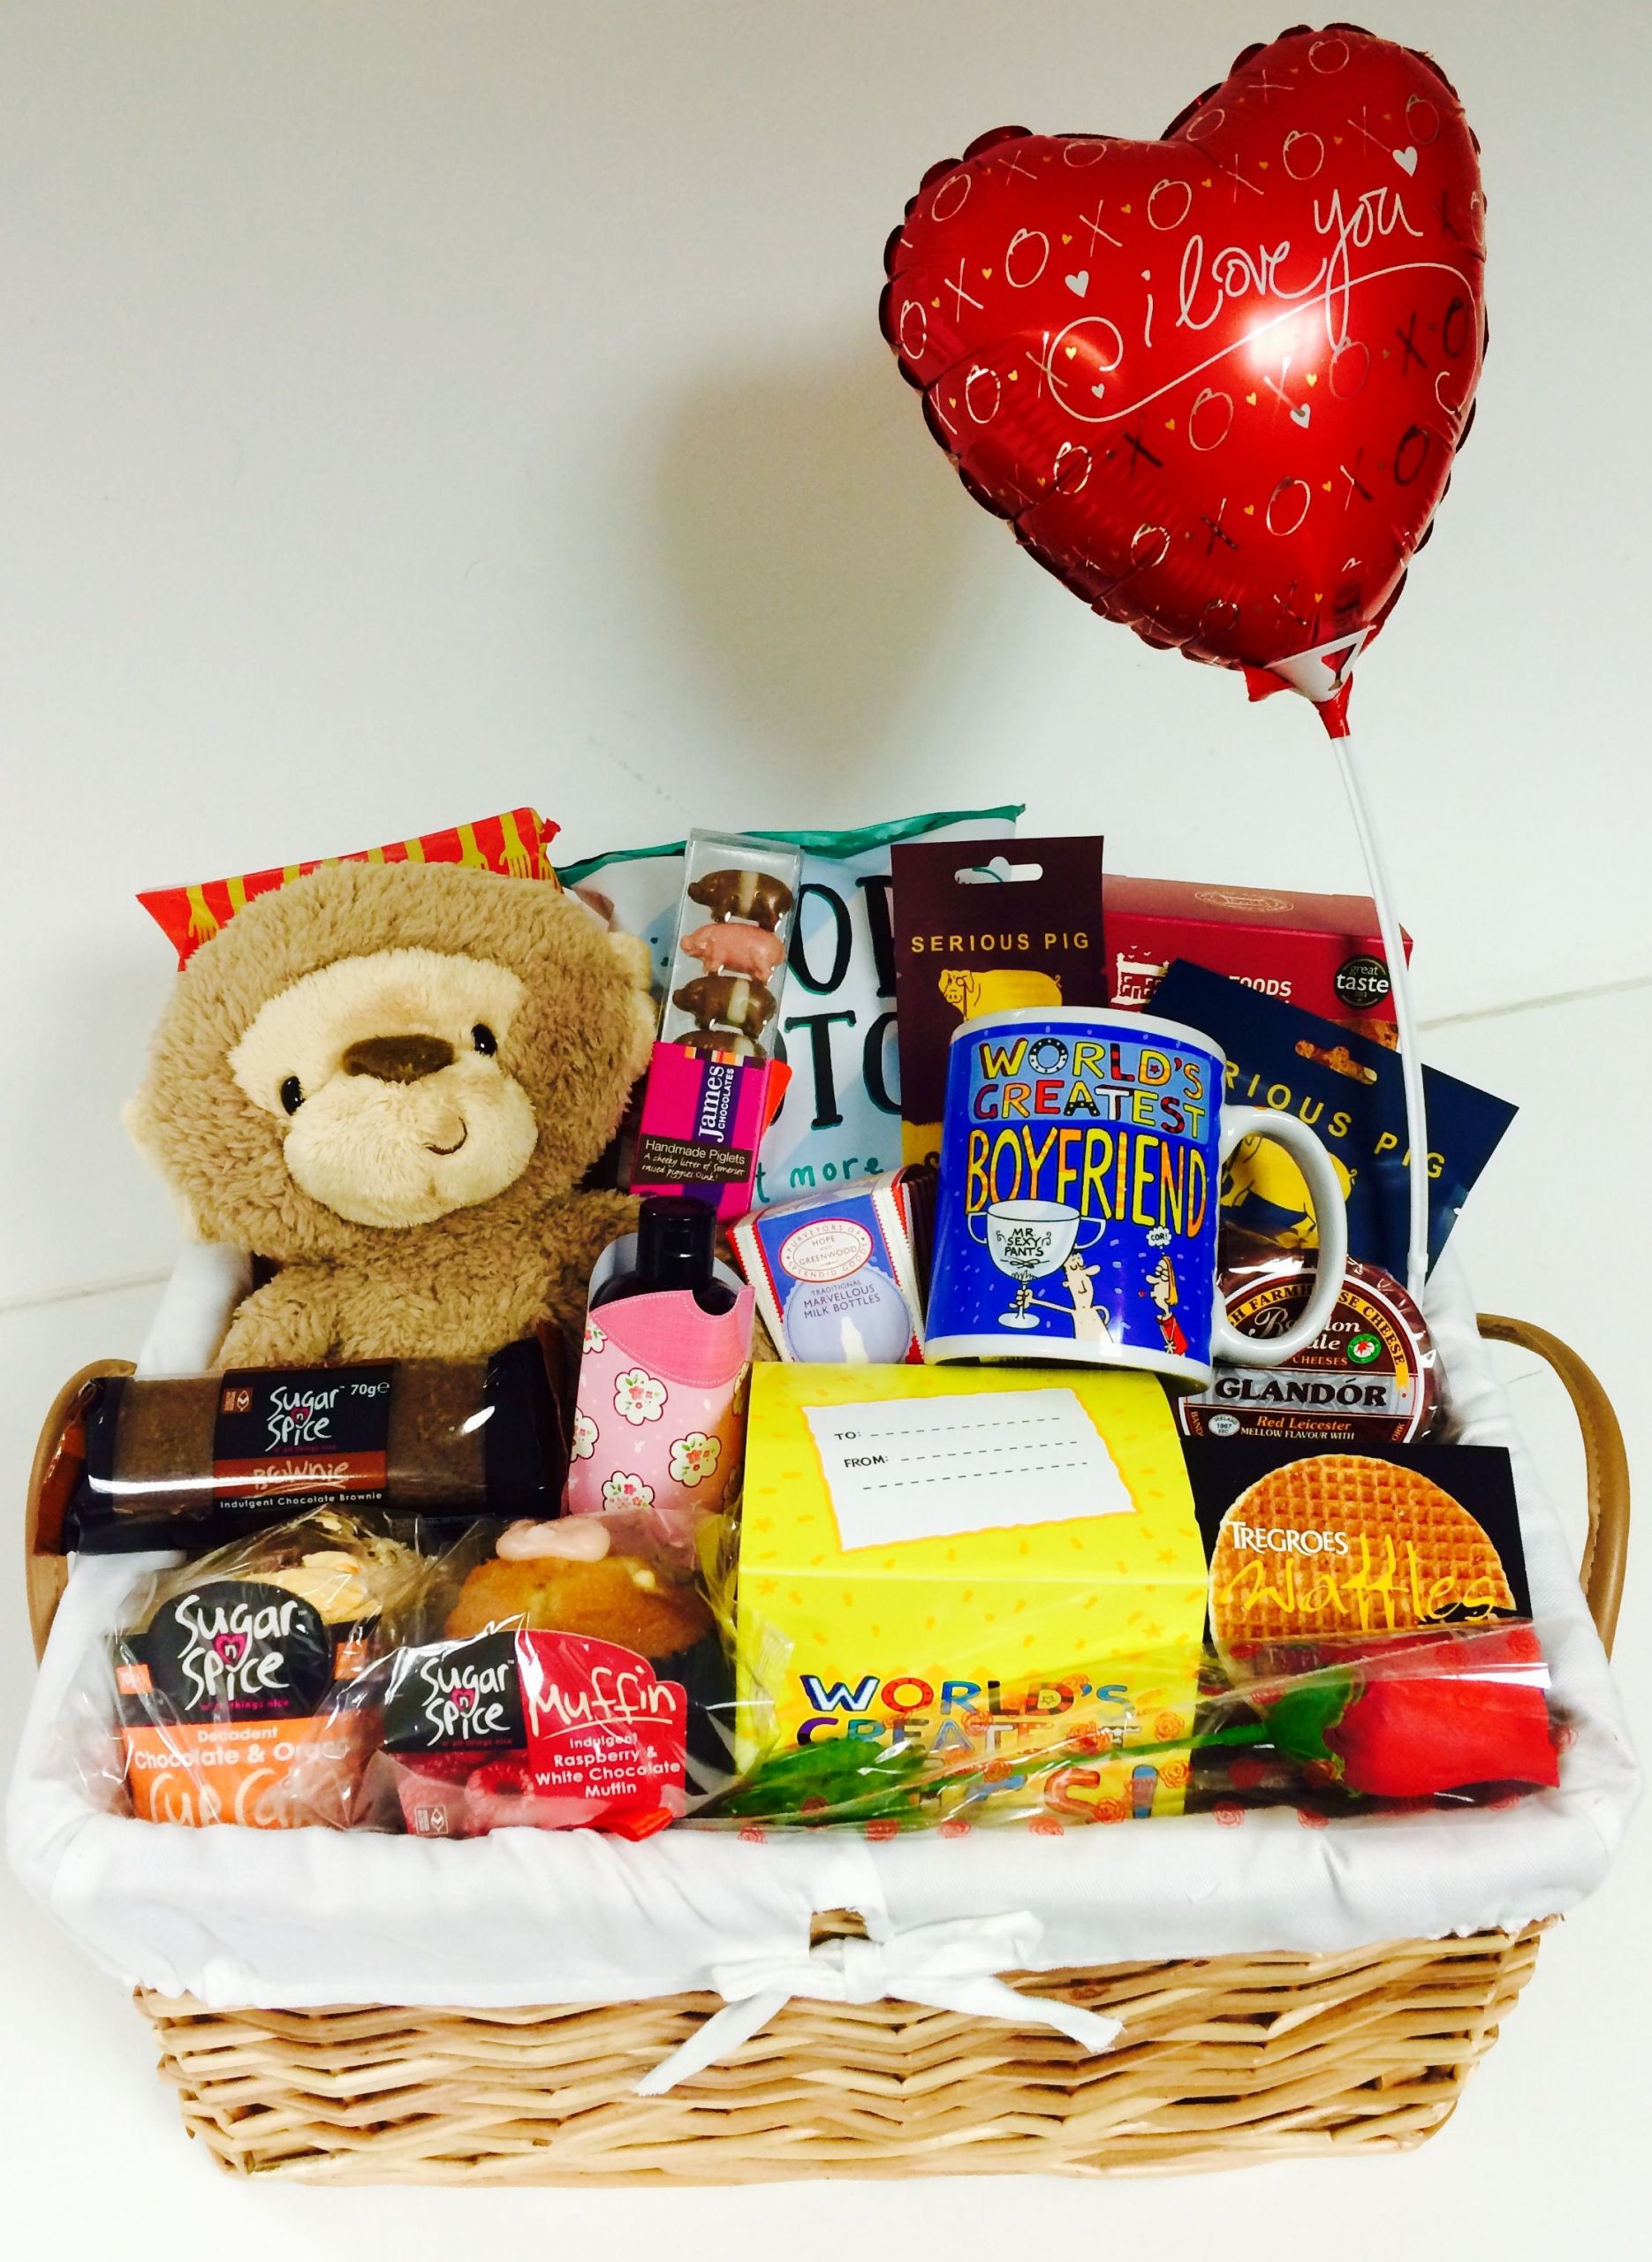 New Boyfriend Valentines Day Gift Ideas
 Pin on Gift Baskets For Him